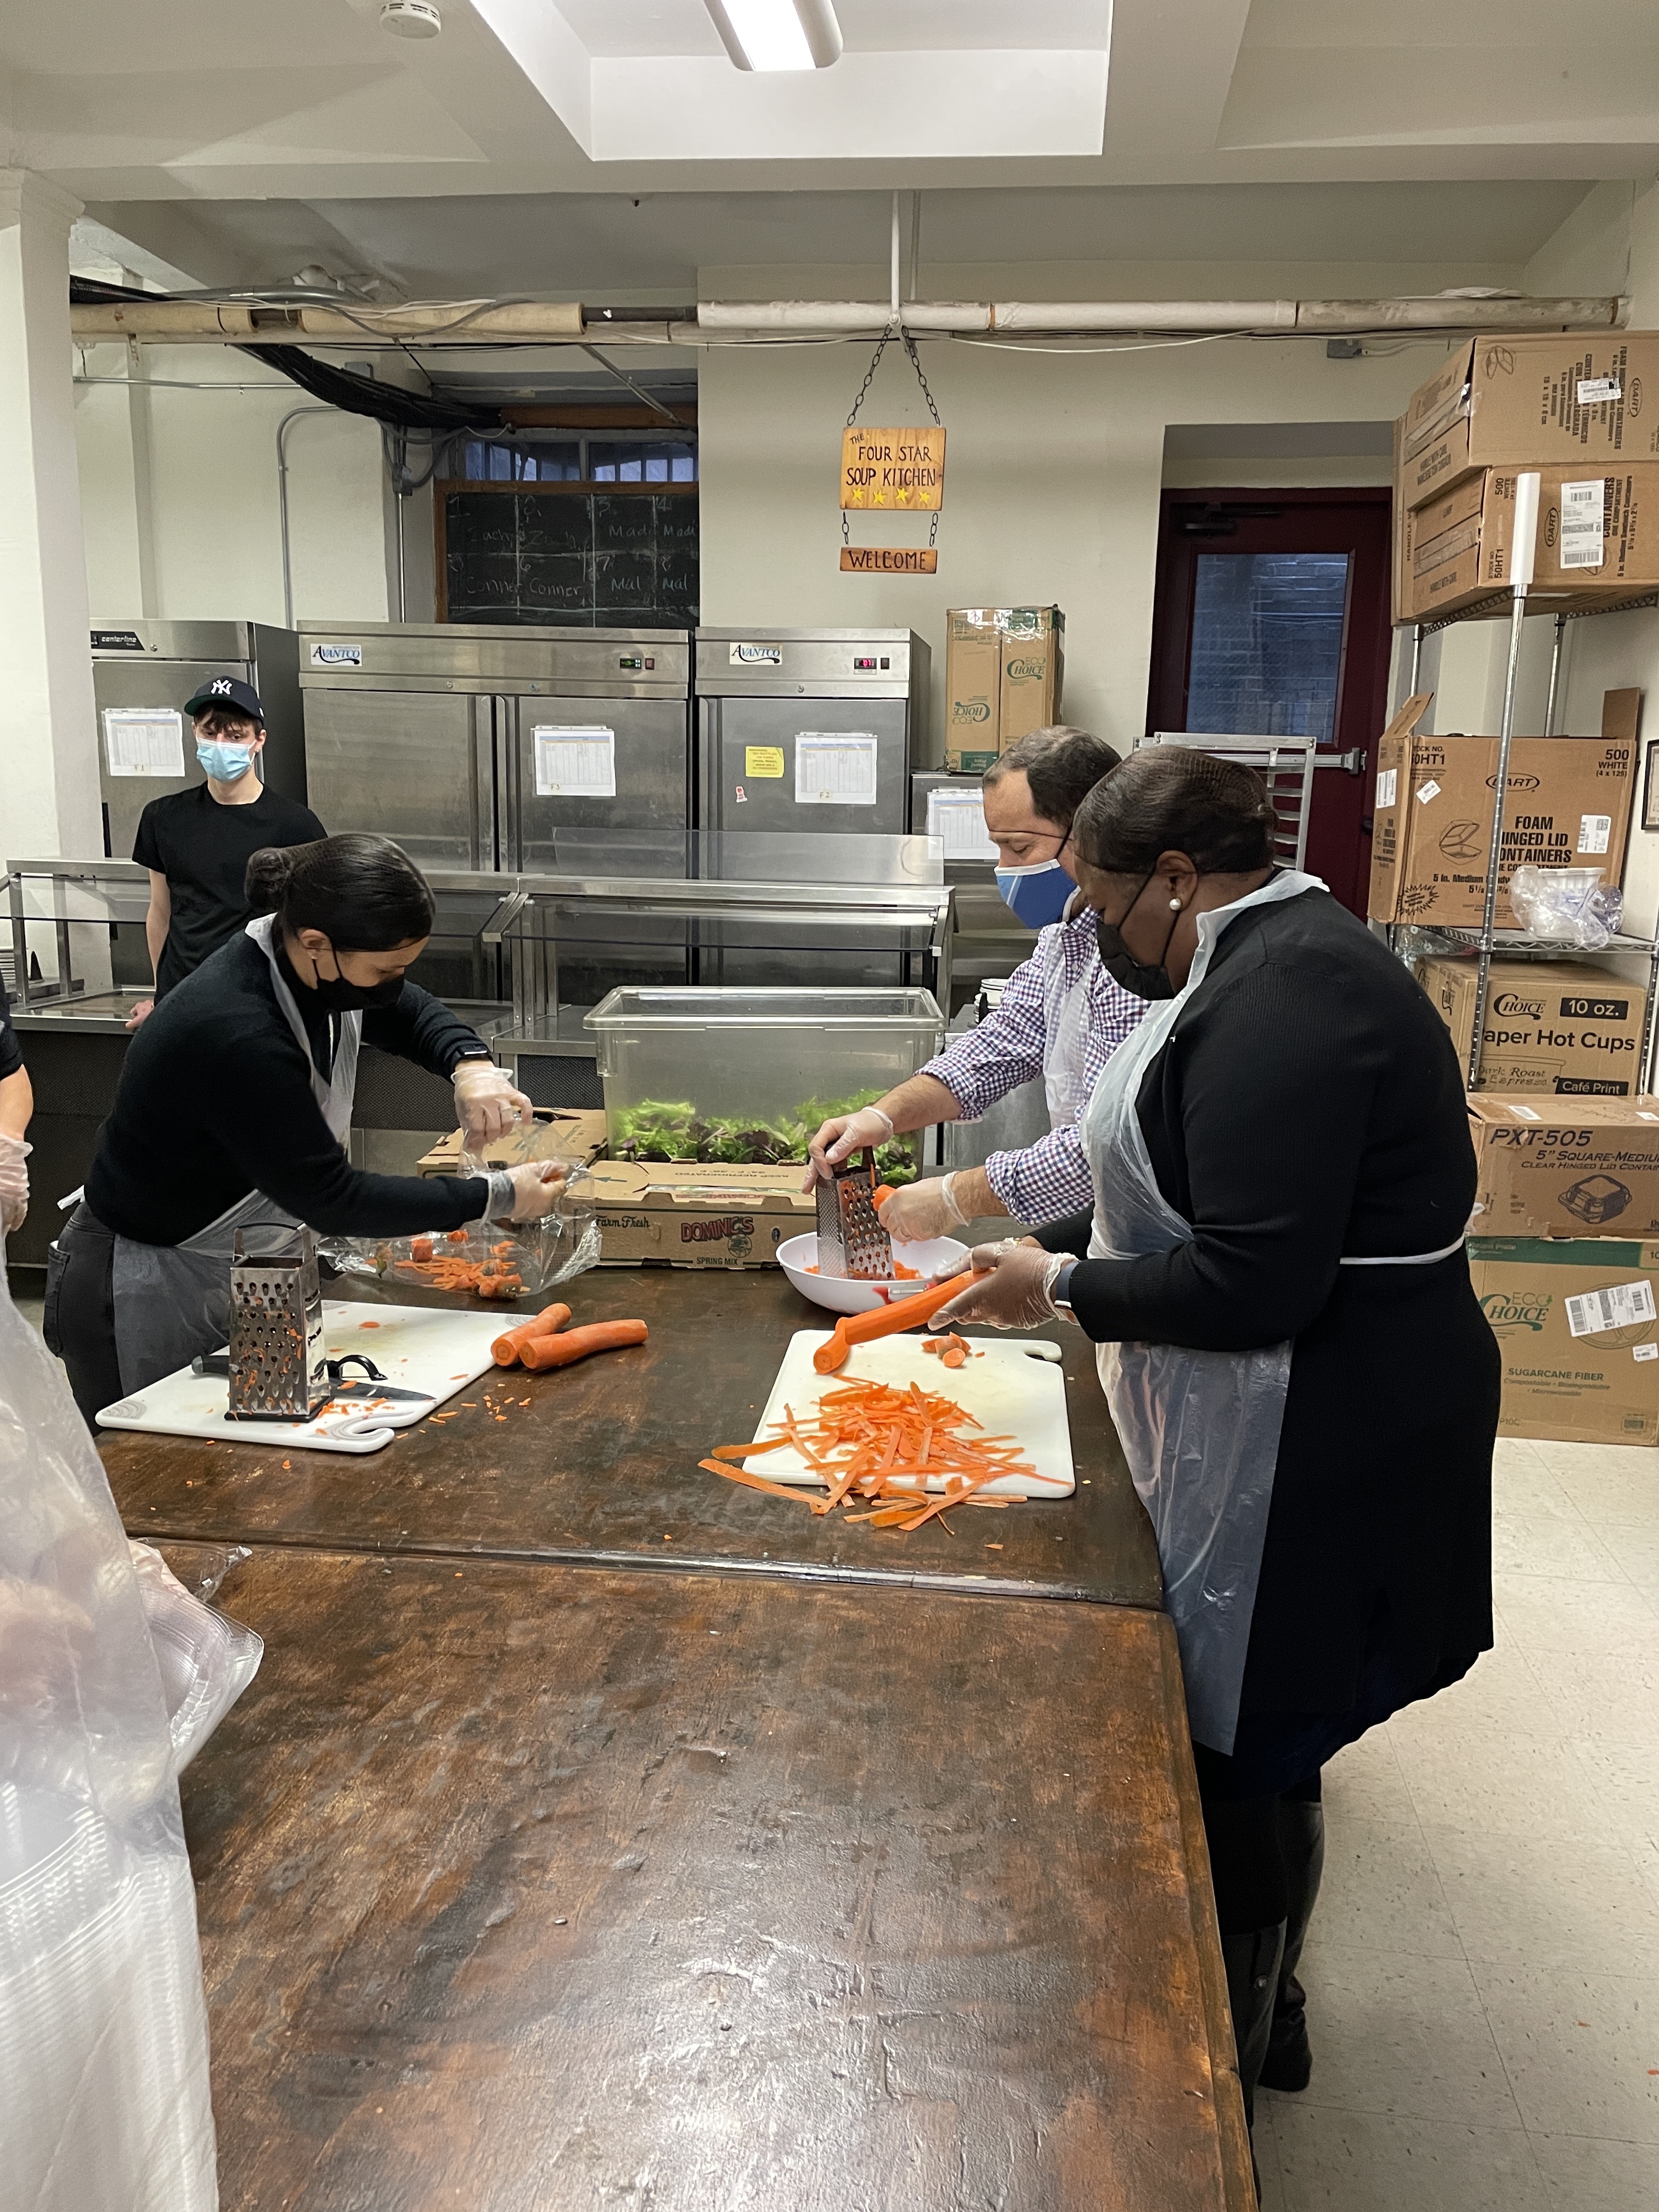 Folks preparing food on a table with cutting boards and wearing aprons and hair nets. 